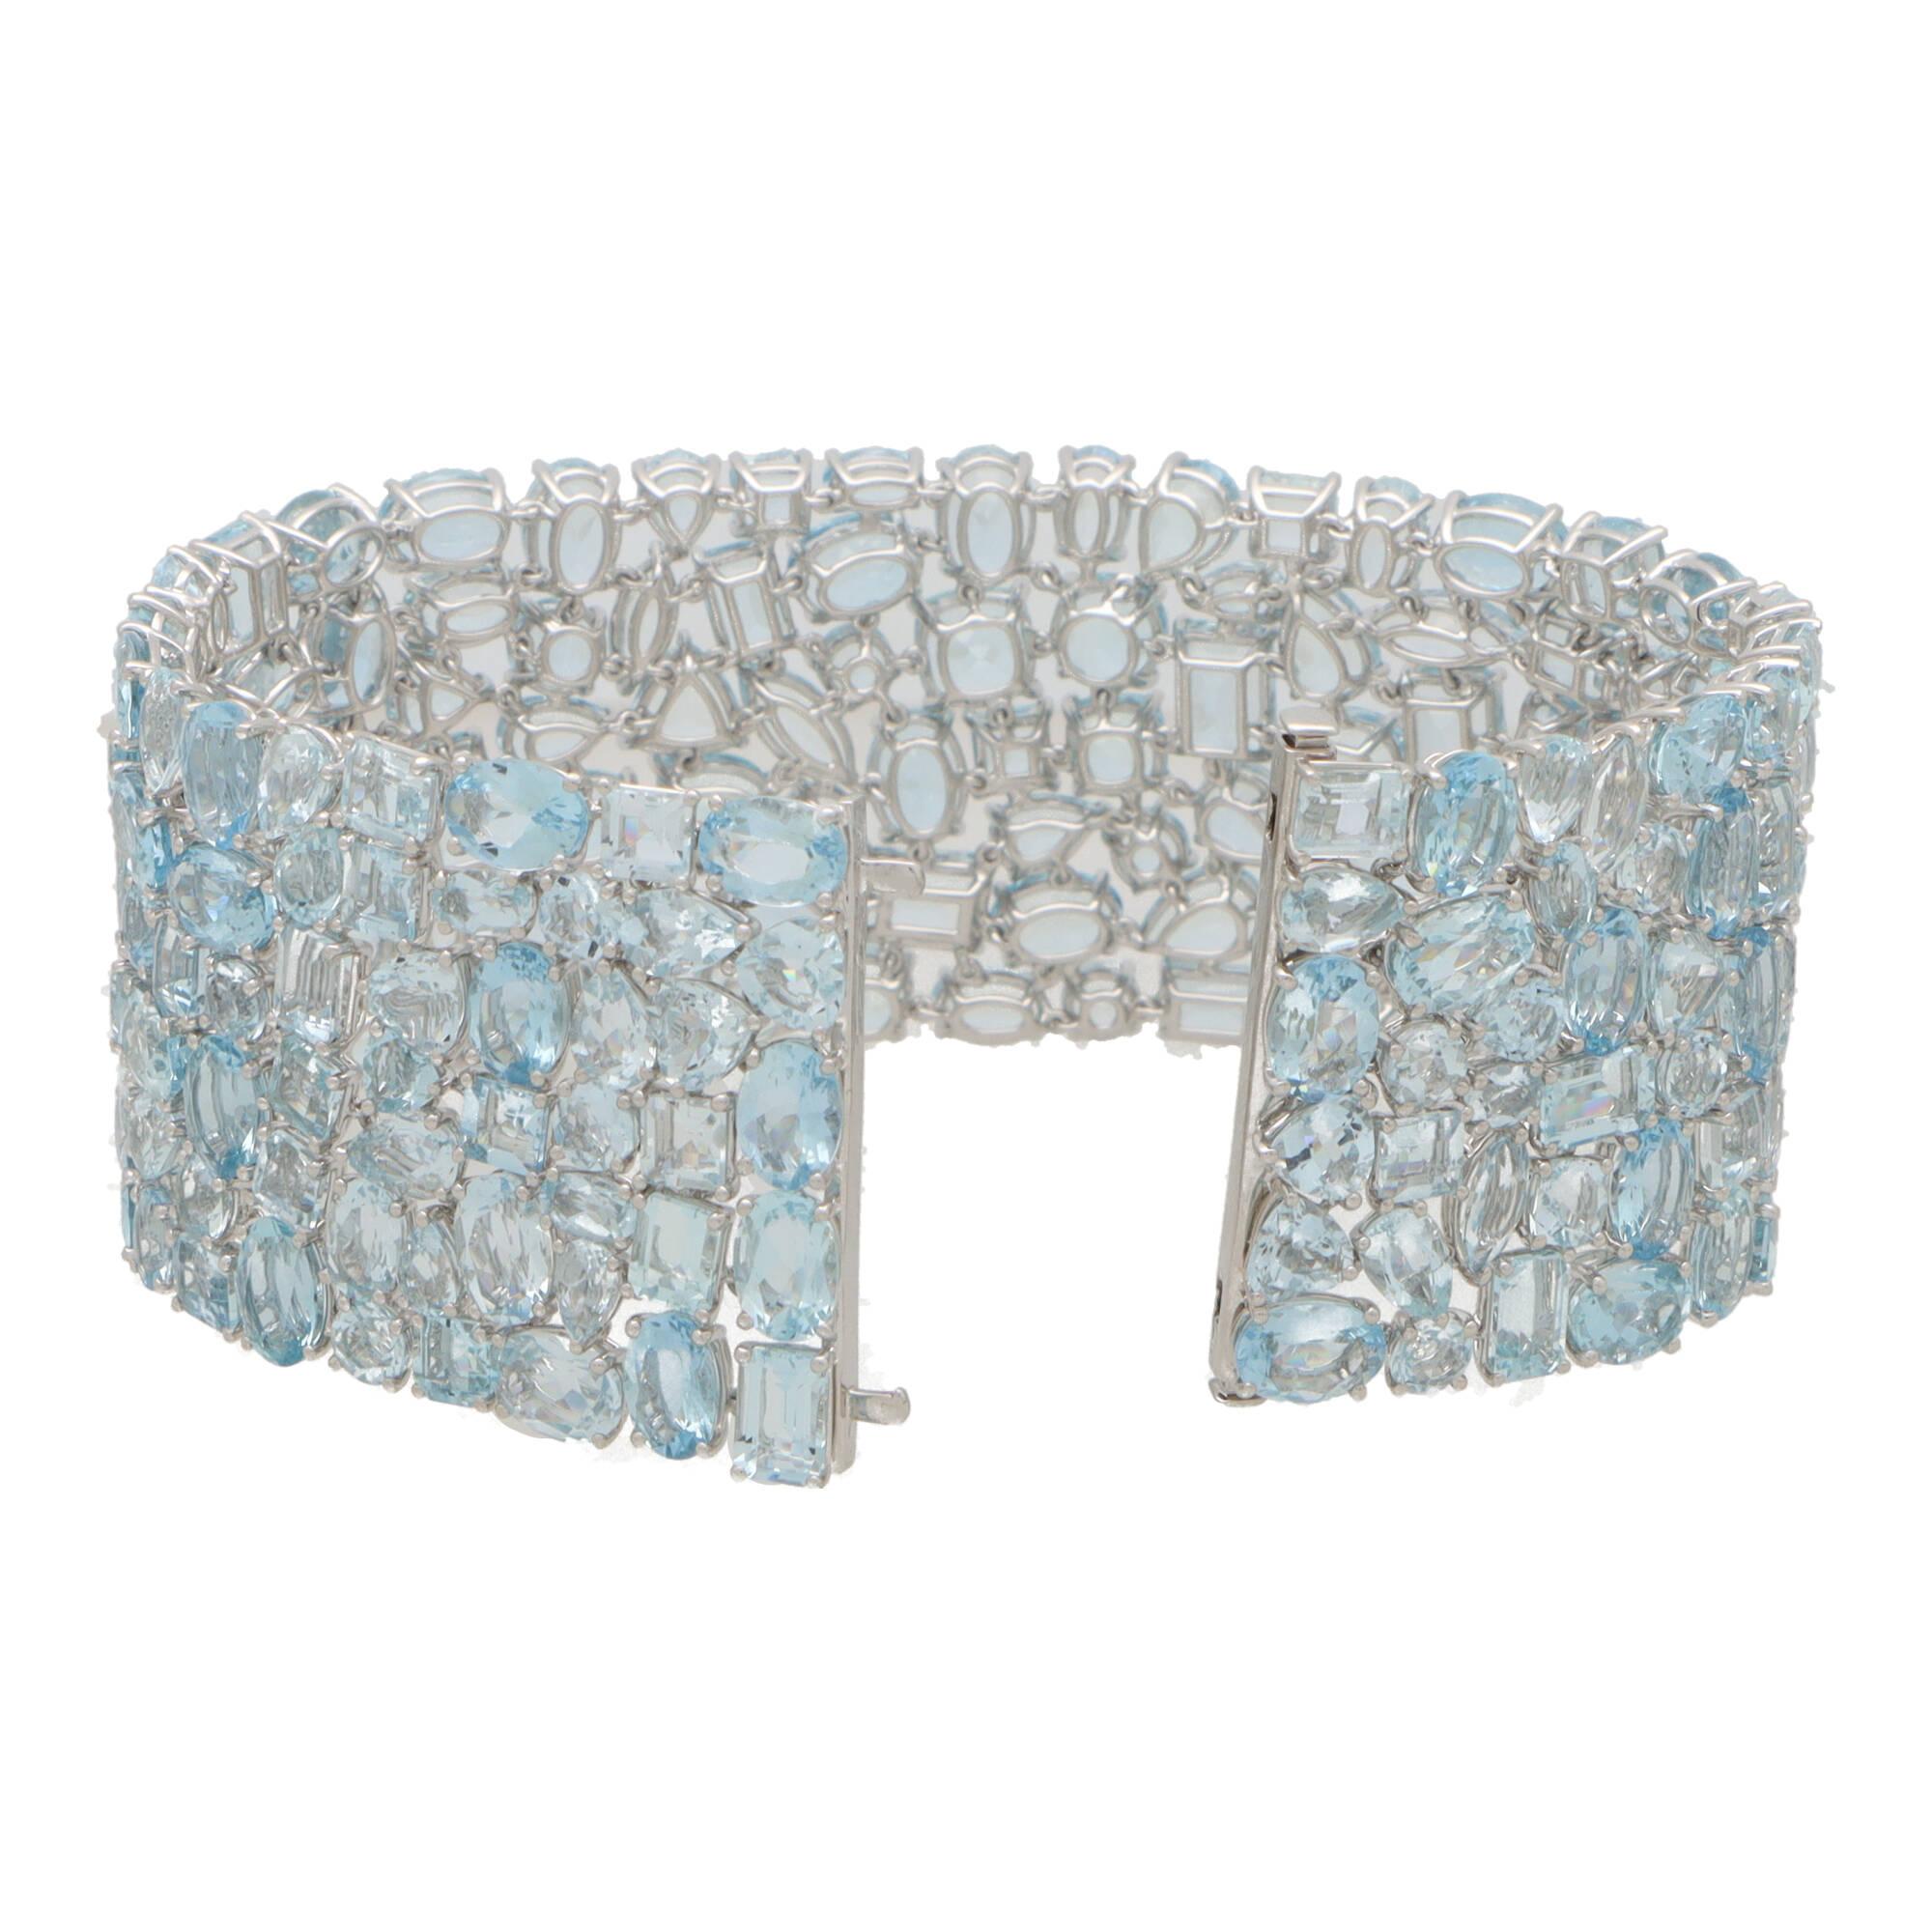 Mixed Cut Contemporary Aquamarine Panel Bracelet Set in 18k White Gold For Sale